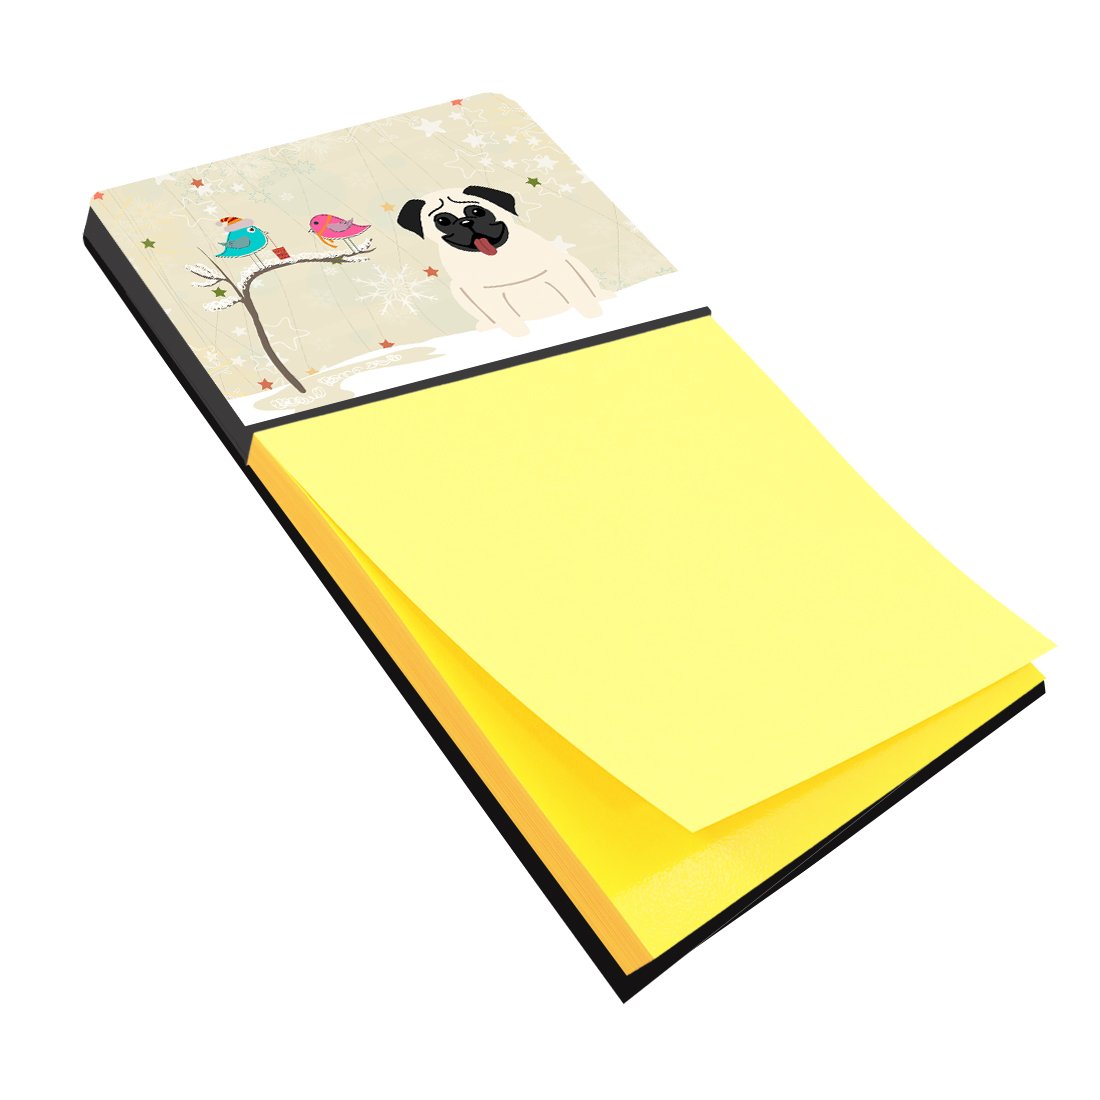 Christmas Presents between Friends Pug Cream Sticky Note Holder BB2476SN by Caroline's Treasures